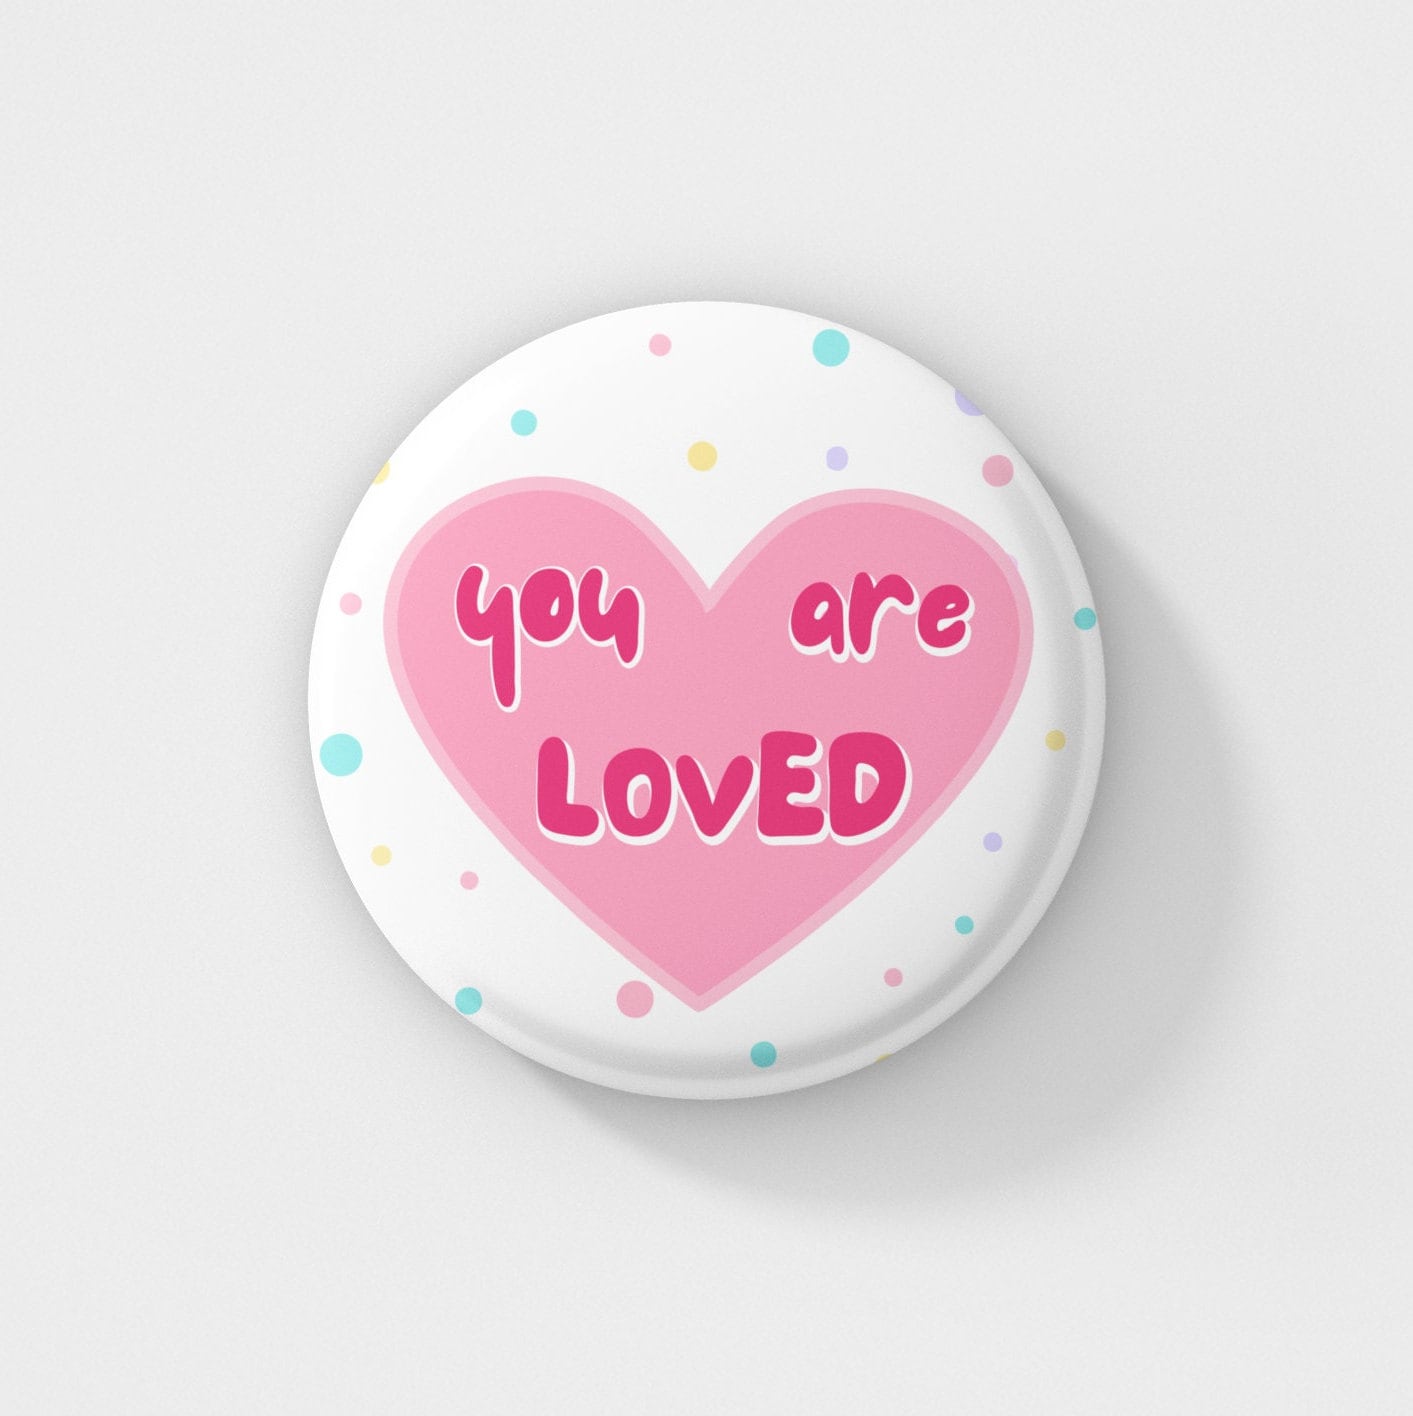 You Are Loved - Badge Pin | Valentines Gift, Romantic Gifts, Cute Pins